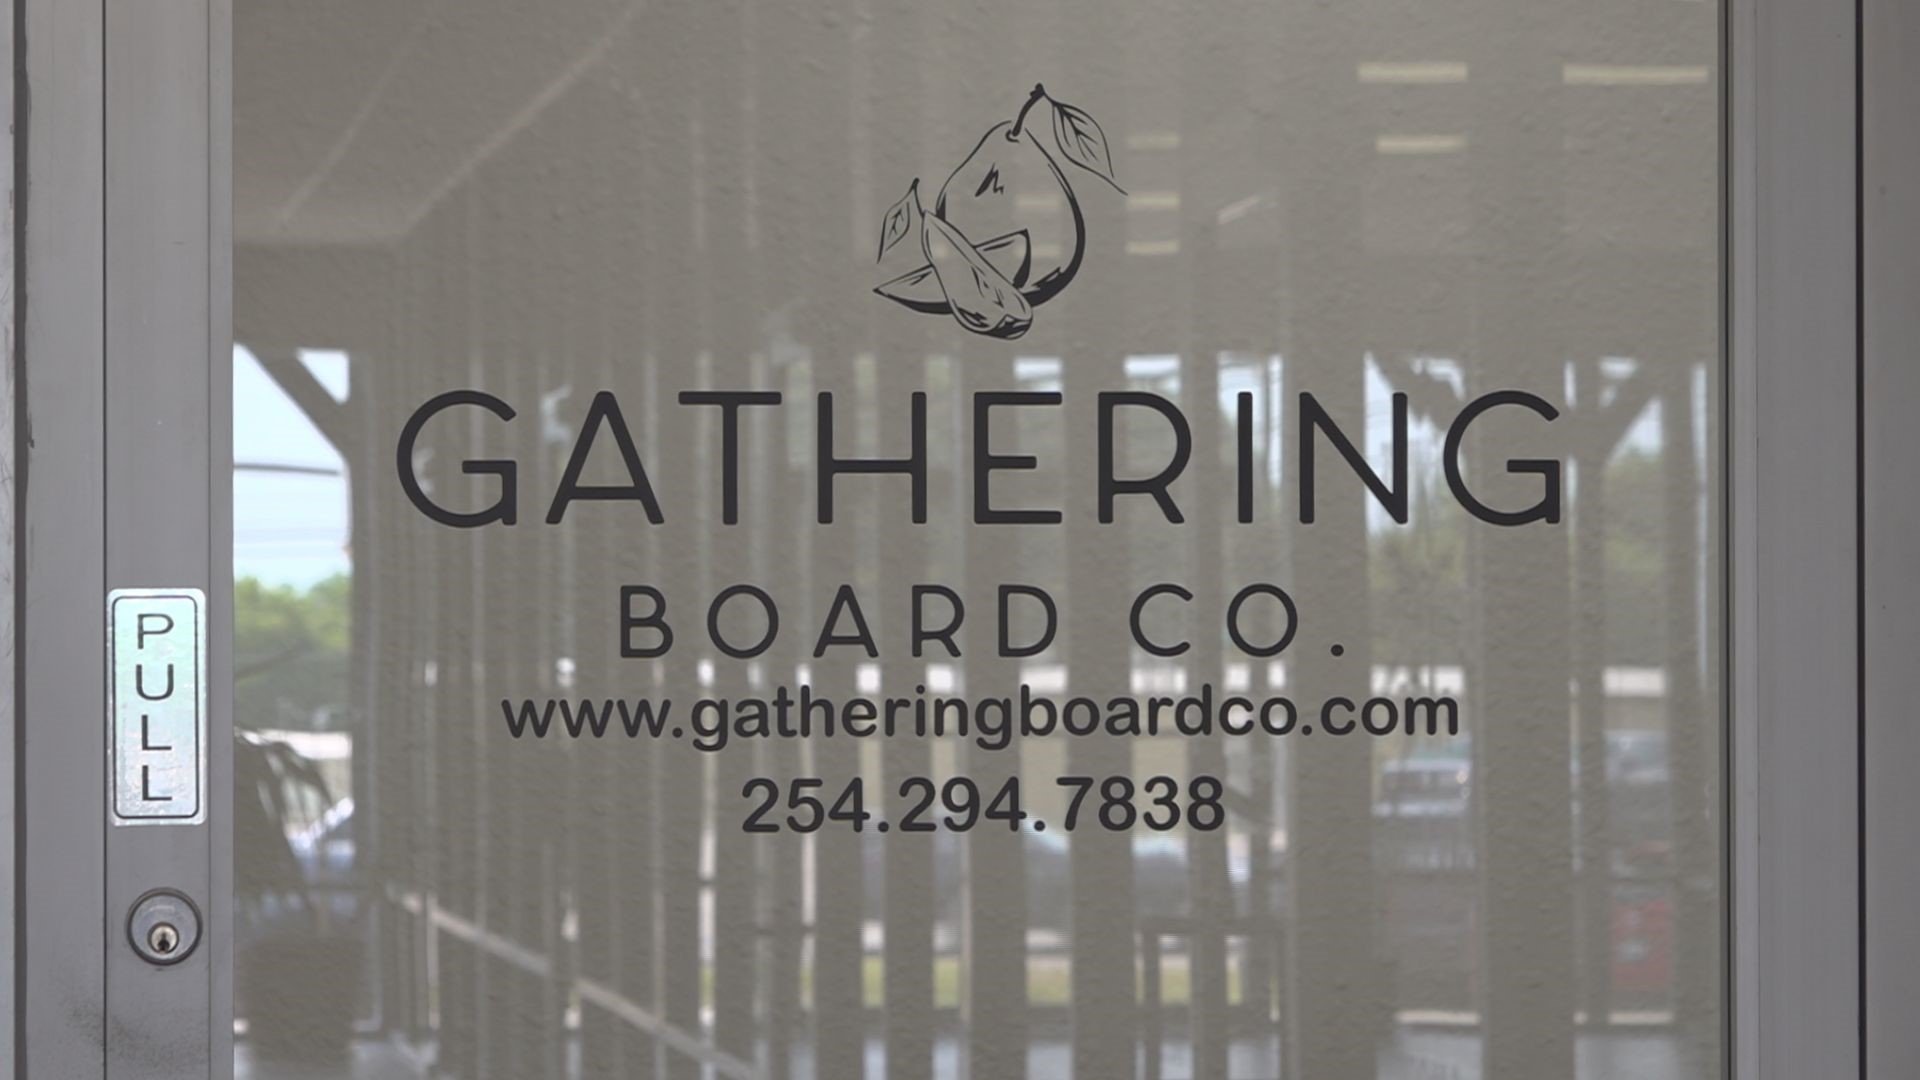 At Gathering Board Co. you'll find grab-and-go snack boxes, drinks; you can pick up things to make your own board at home, including meats, cheeses, and jams.